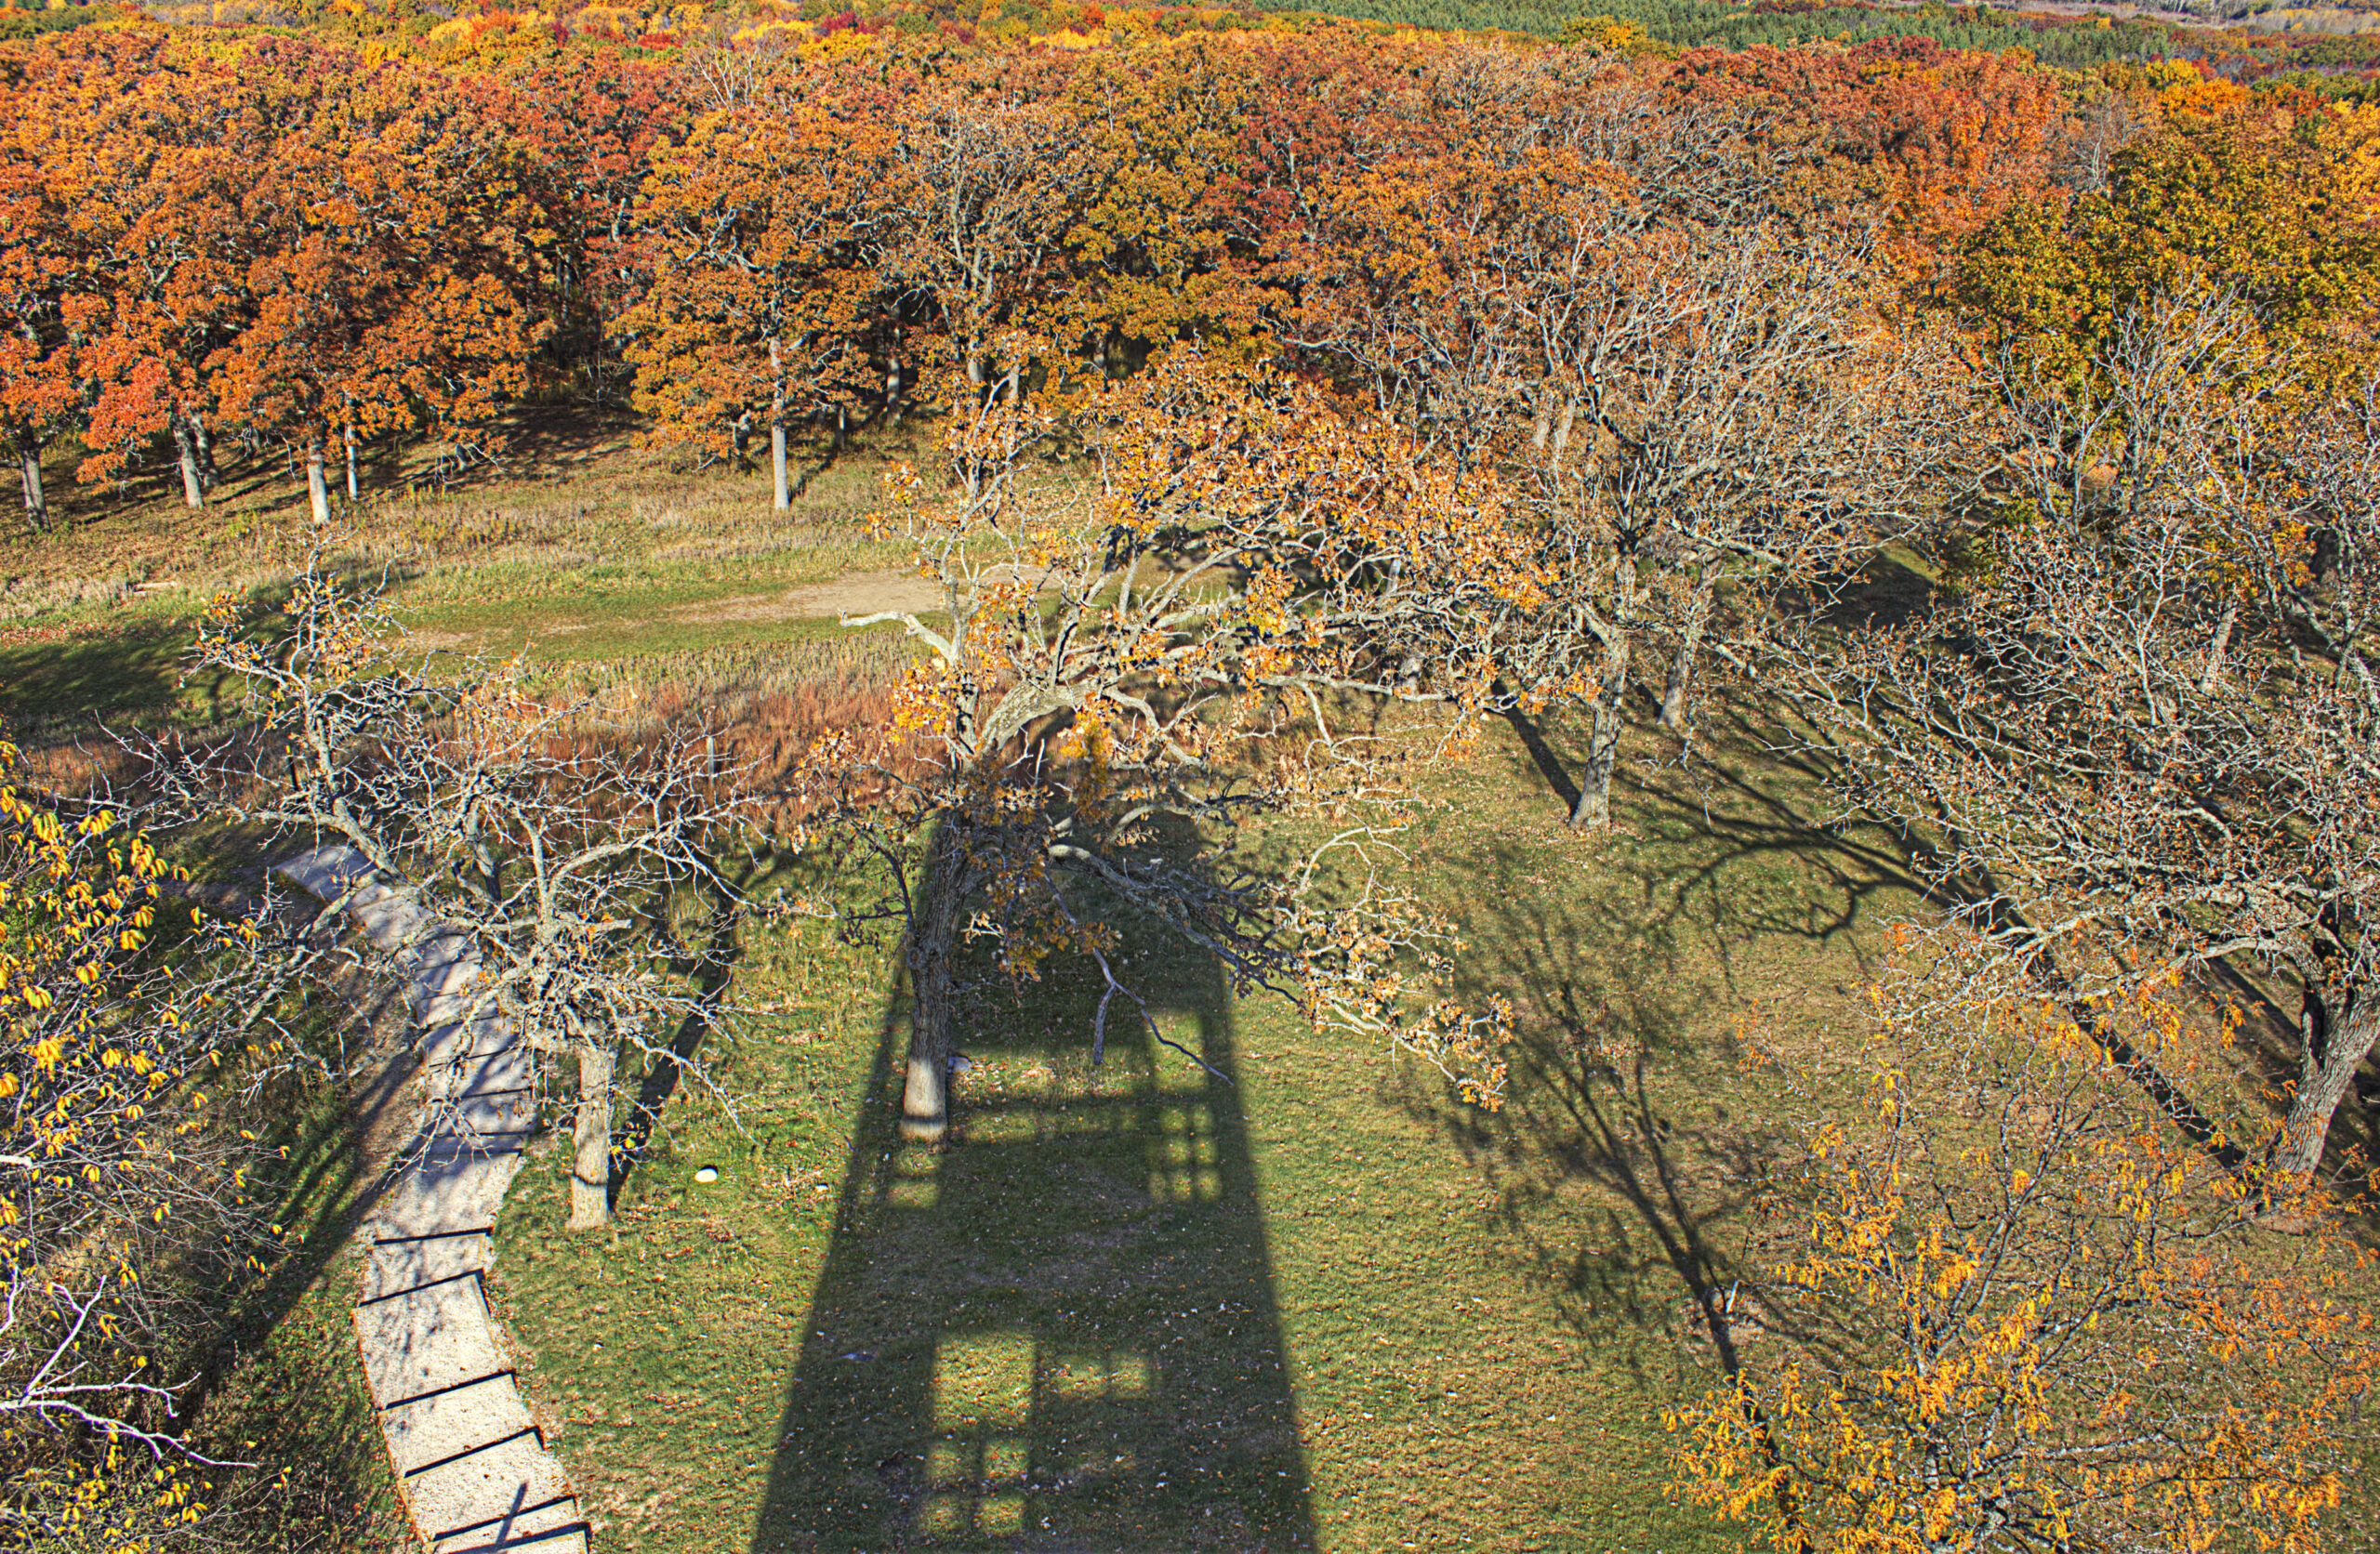 The shadow of the Lapham Peak Tower is surrounded by trees in peak autumn color.